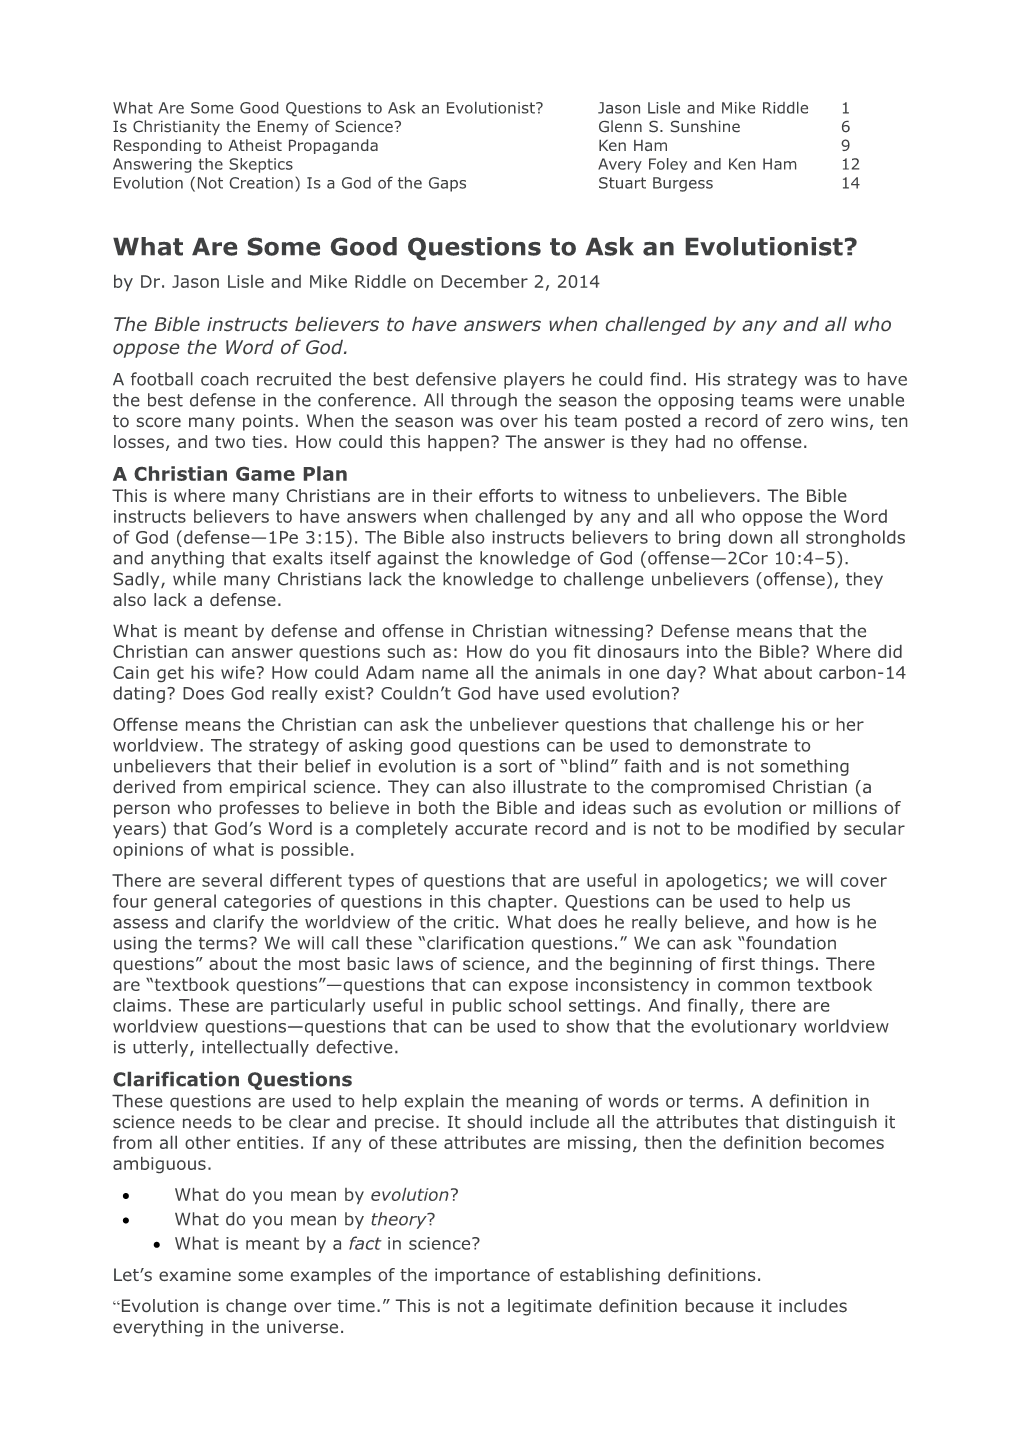 What Are Some Good Questions to Ask an Evolutionist? Jason Lisleandmike Riddle 1